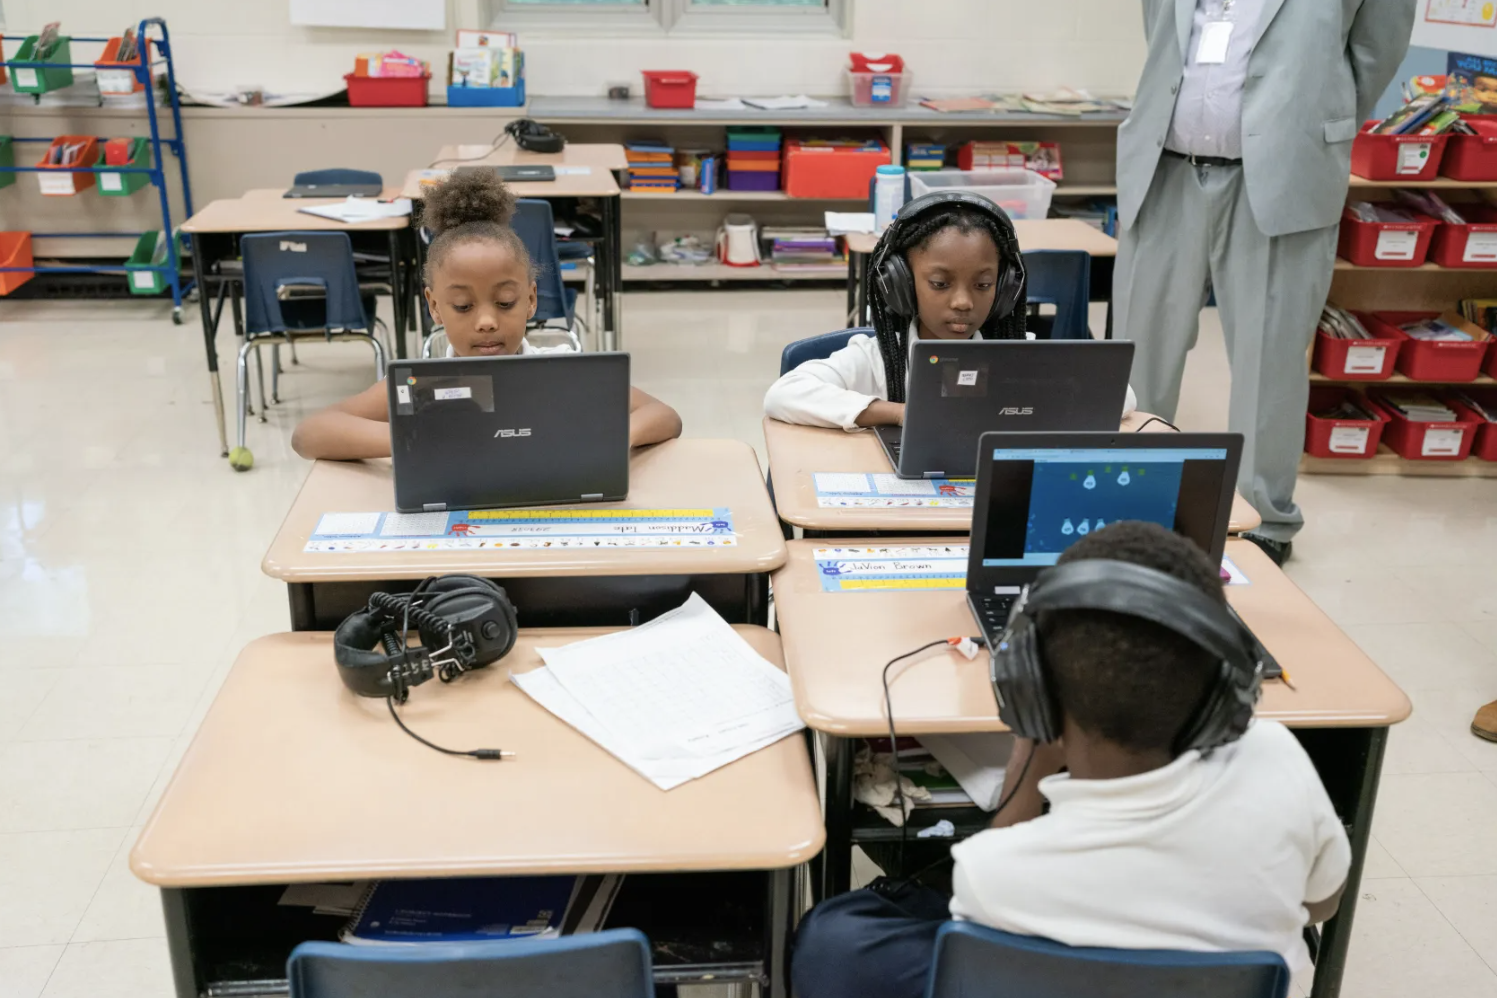 NYC’s 5th and 8th graders must take spring’s state tests on computers. Are schools ready?